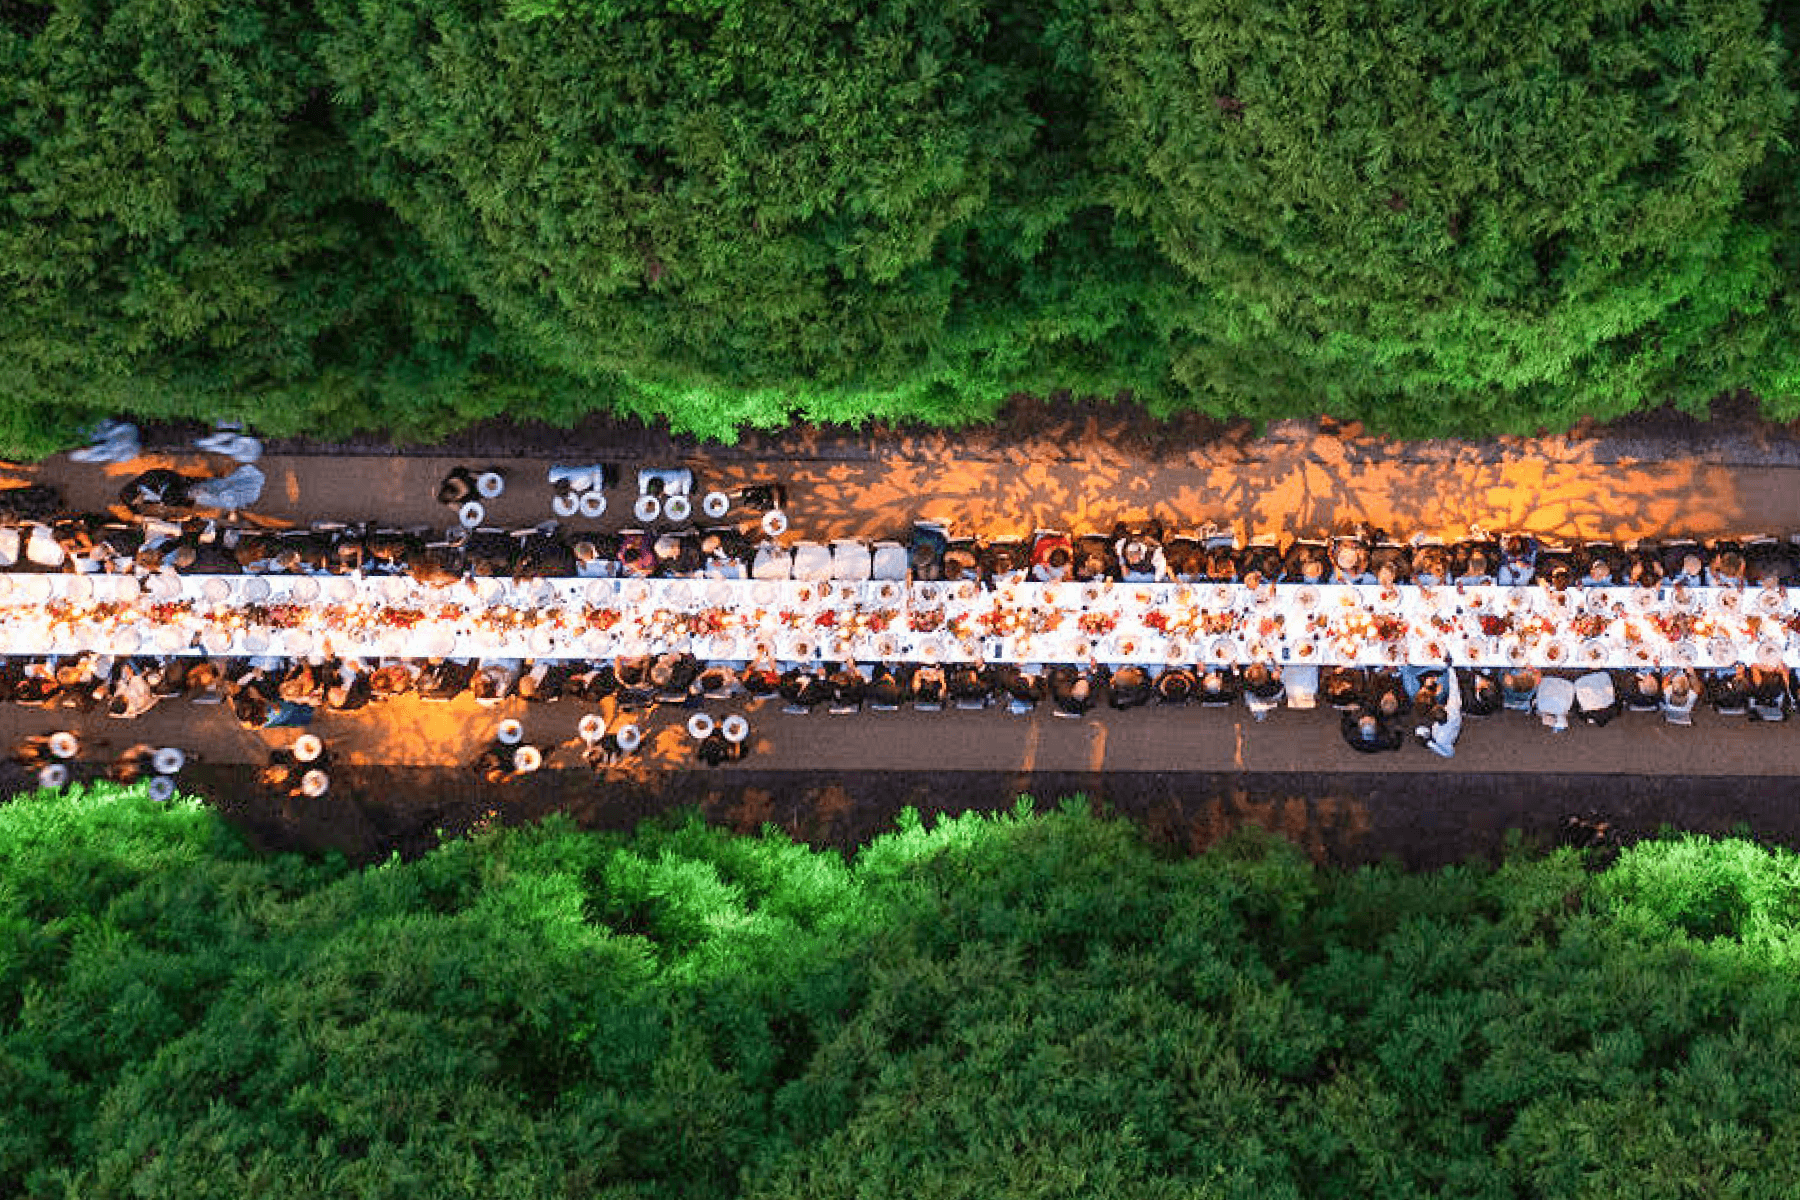 Viewed from above, a very long white wedding banquet table with servers and guests is set up on a road surrounded by green trees.